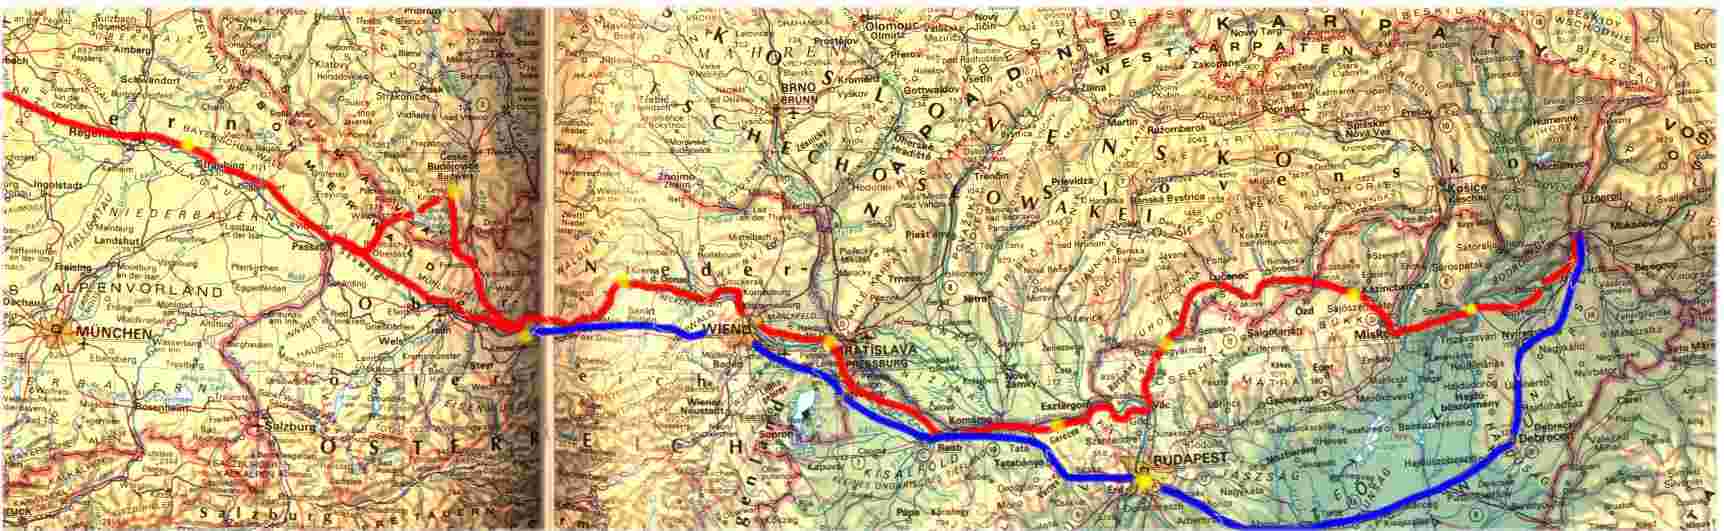 Unsere Route